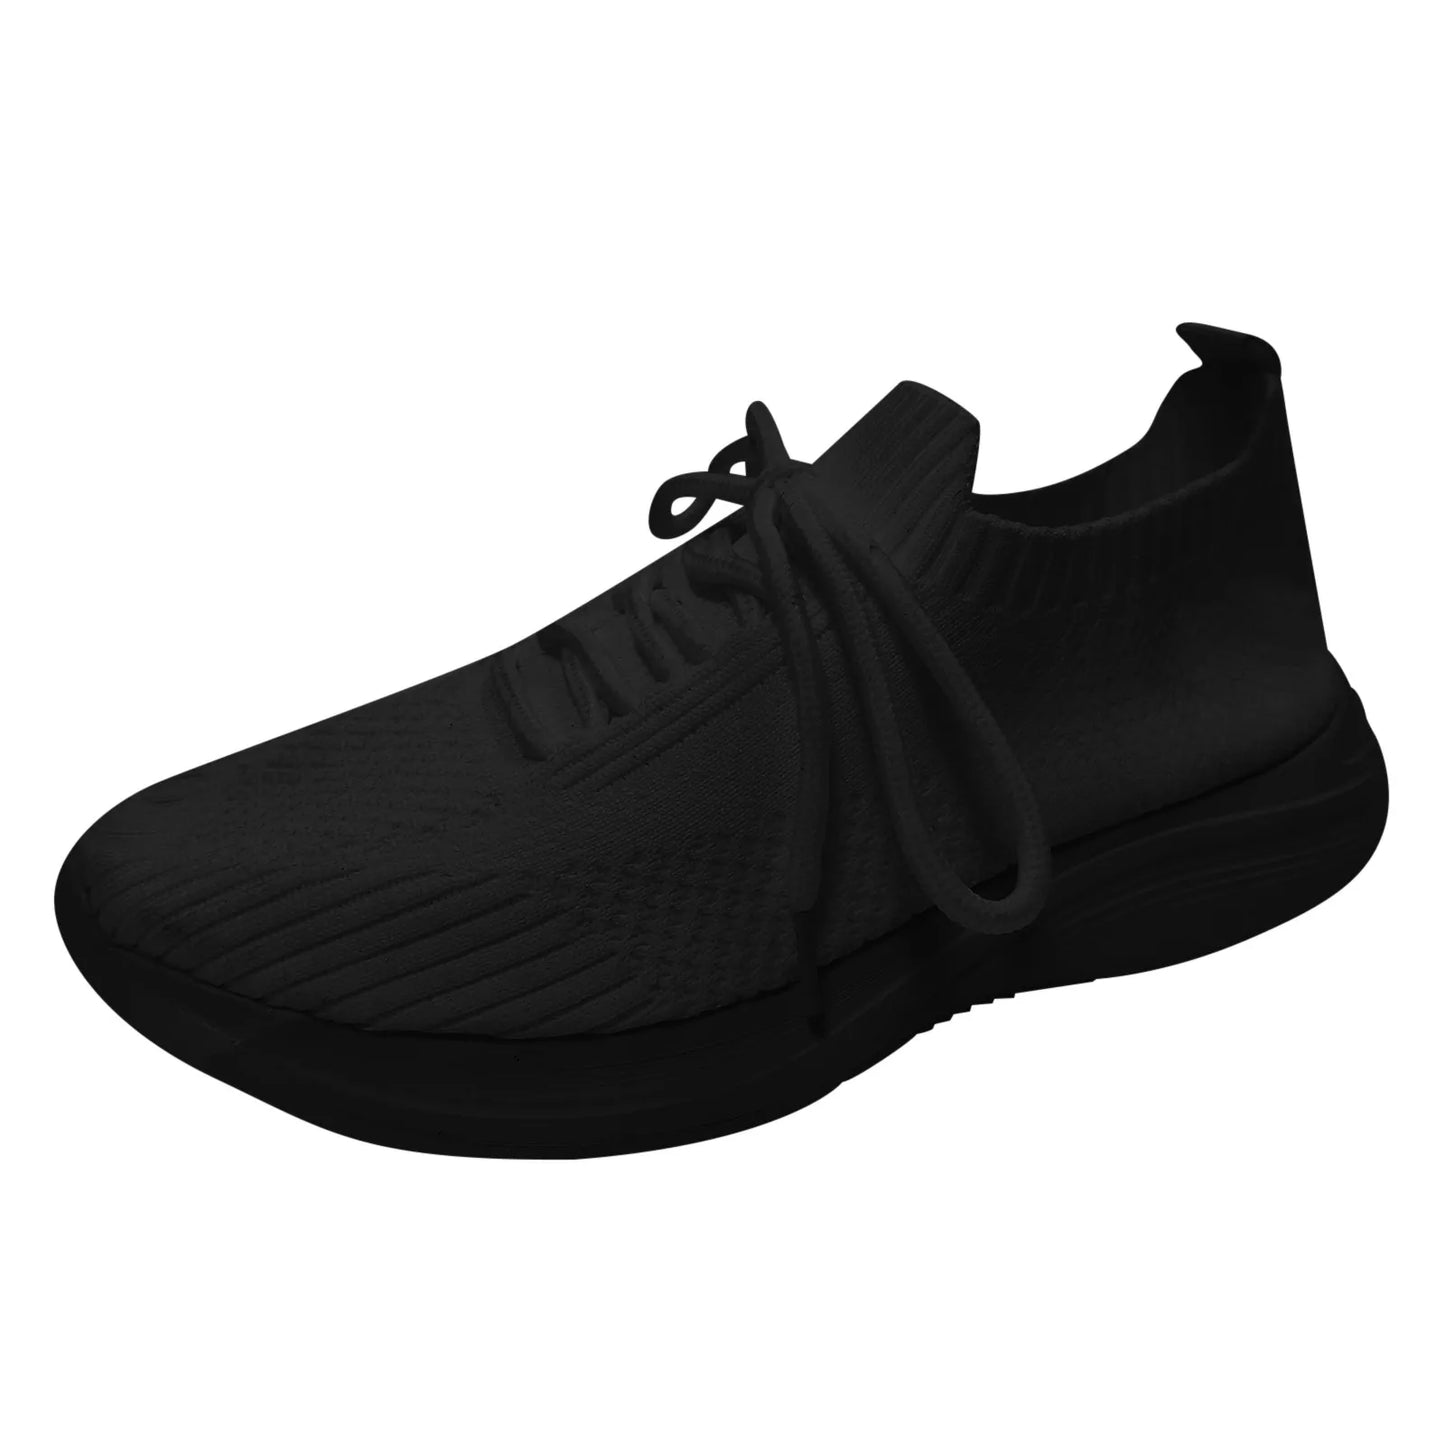 Running Shoes For Women Leisure Shoes Fashion/Breathable Sneaker Women's Running Wedge Sneaker